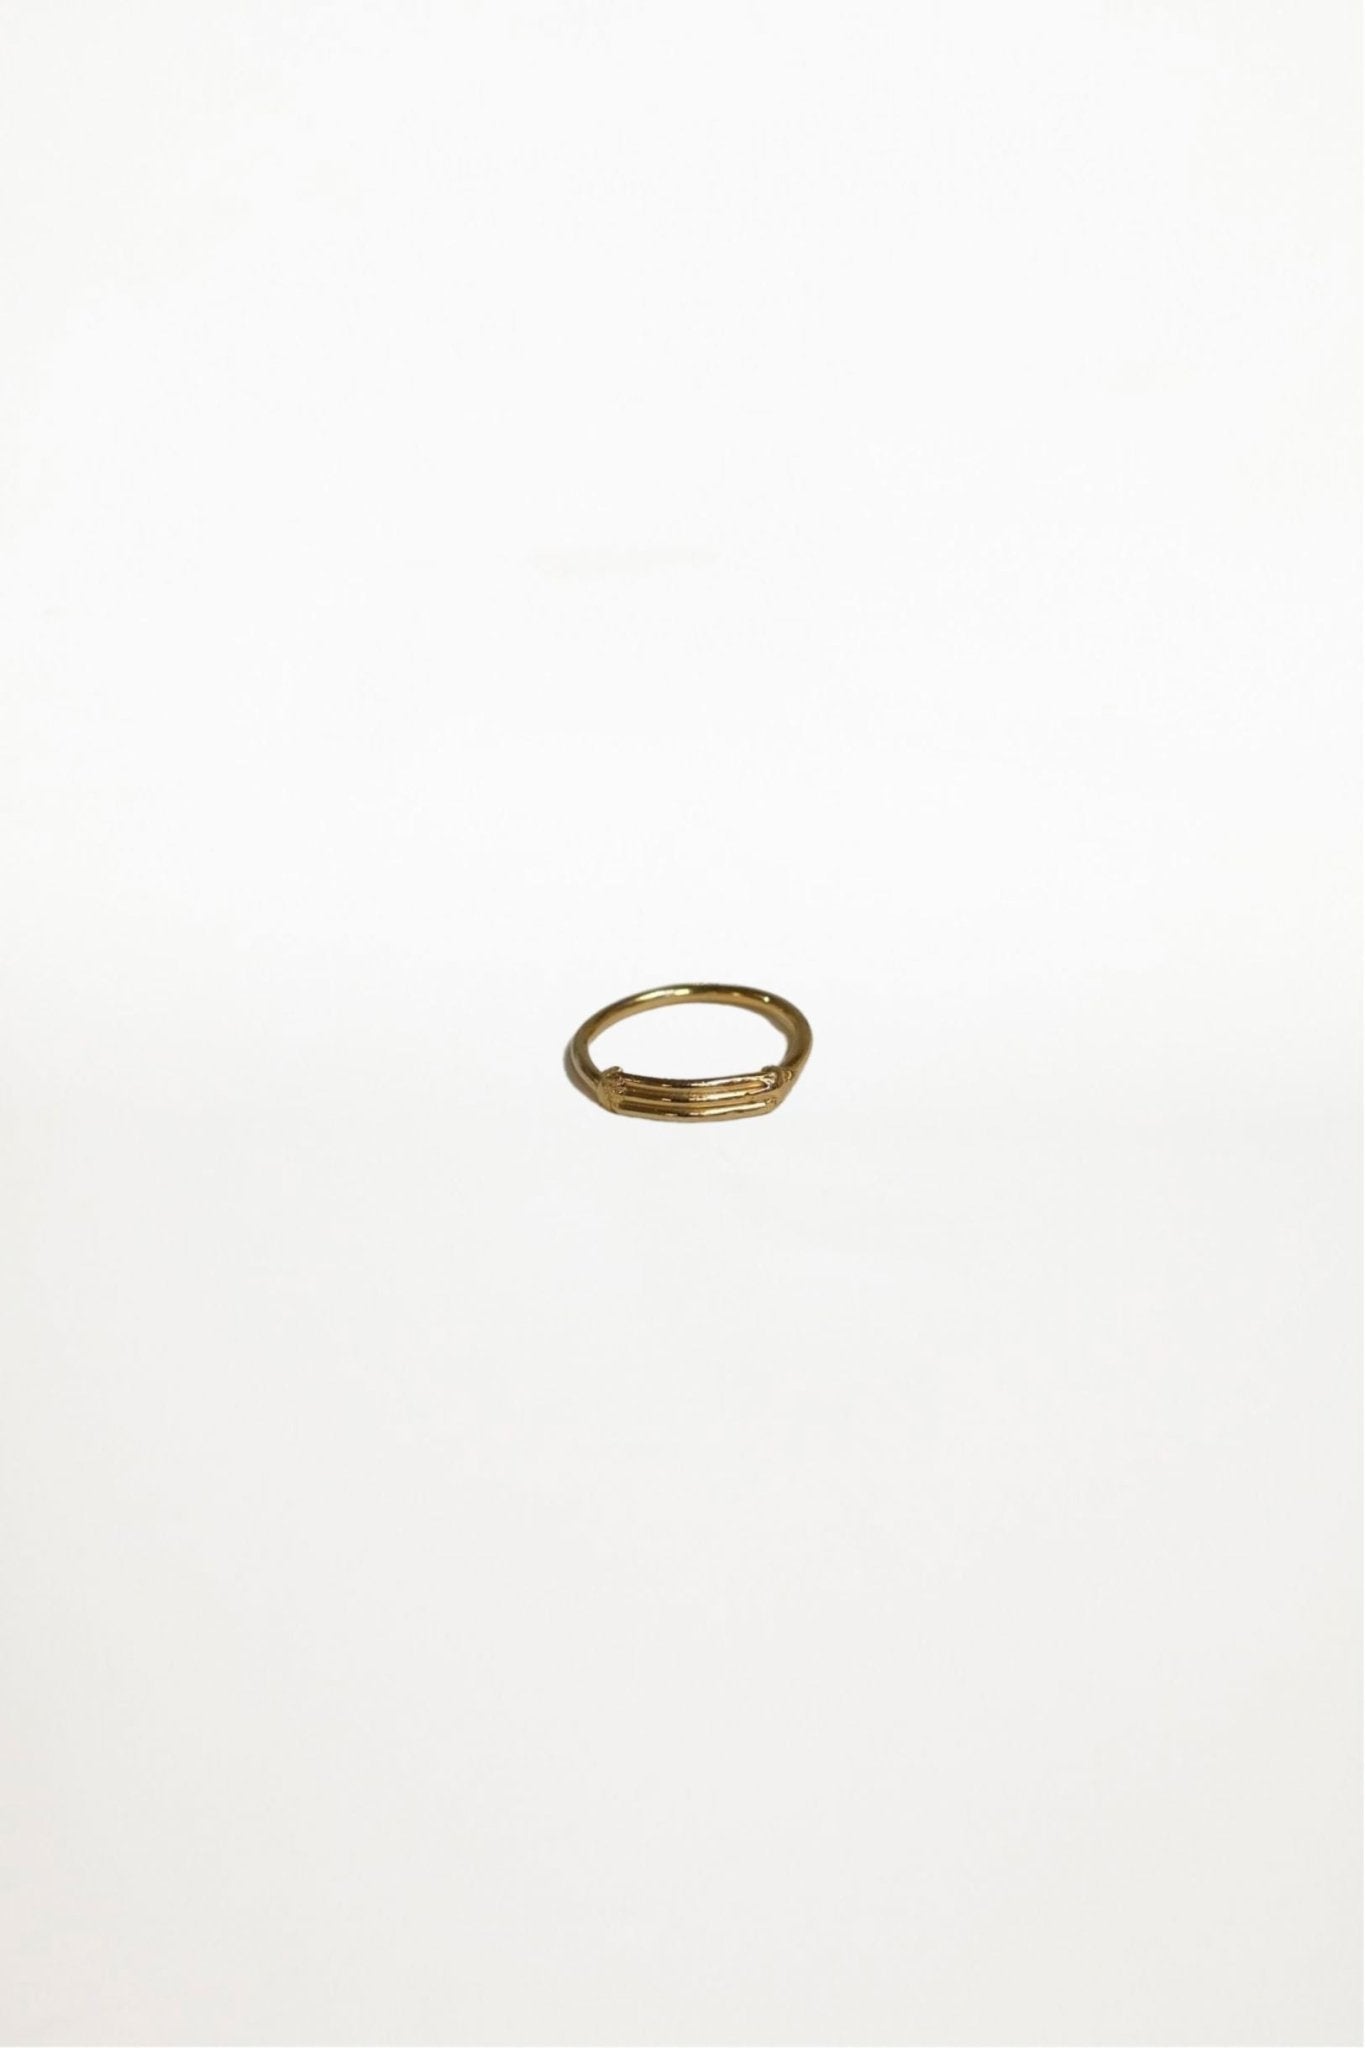 Lilly Buttrose - Wax Ring - 24k Gold Plated - Ensemble Studios